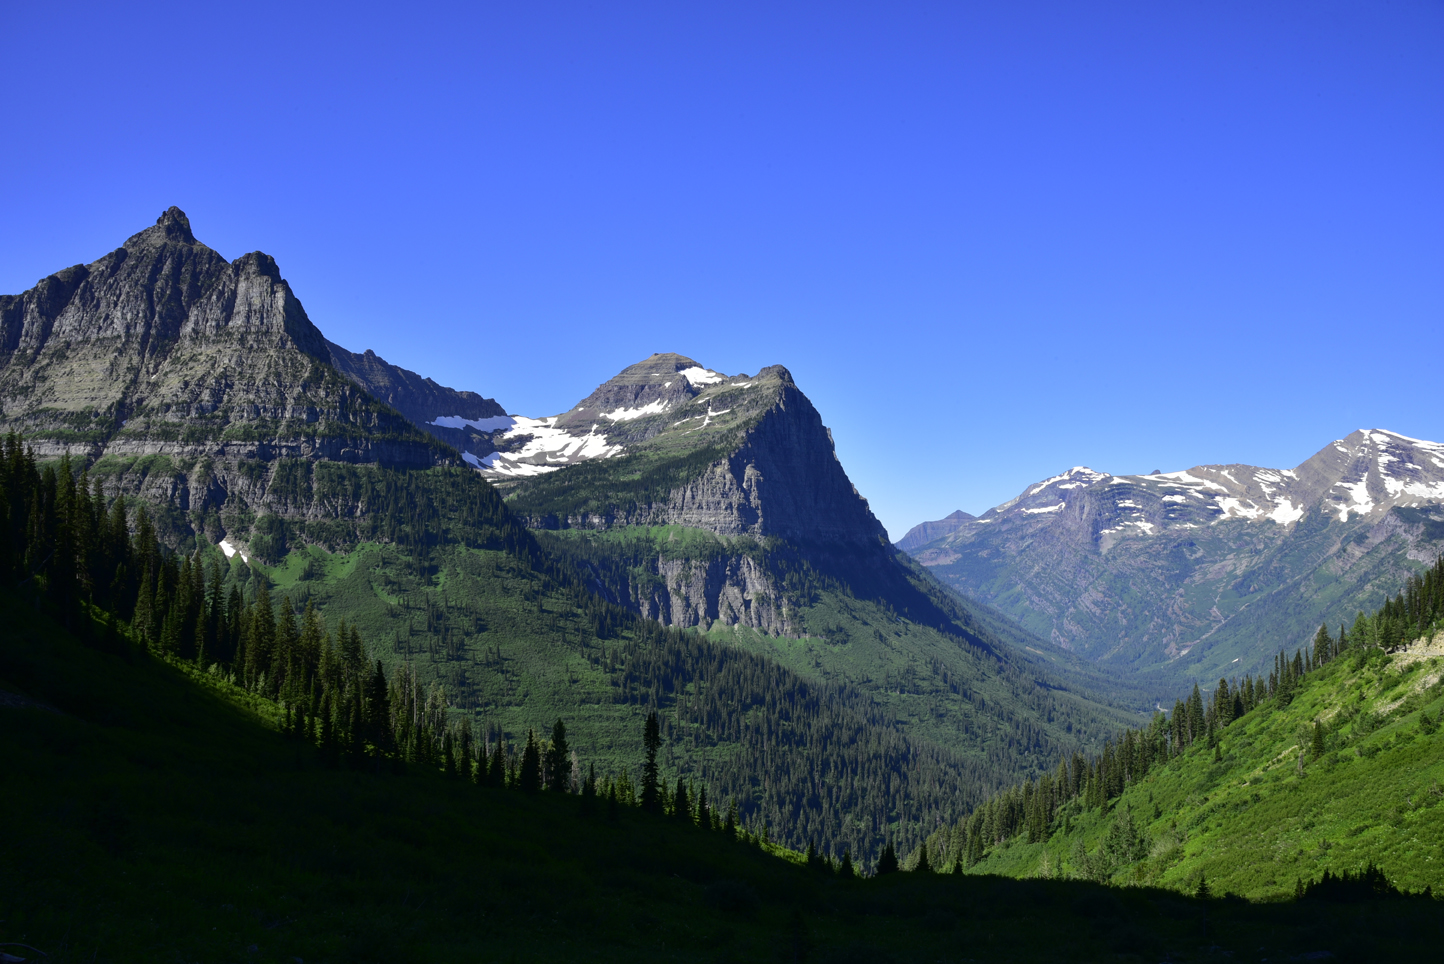 View along Going-to-the-Sun Road  -  Glacier National Park, Montana